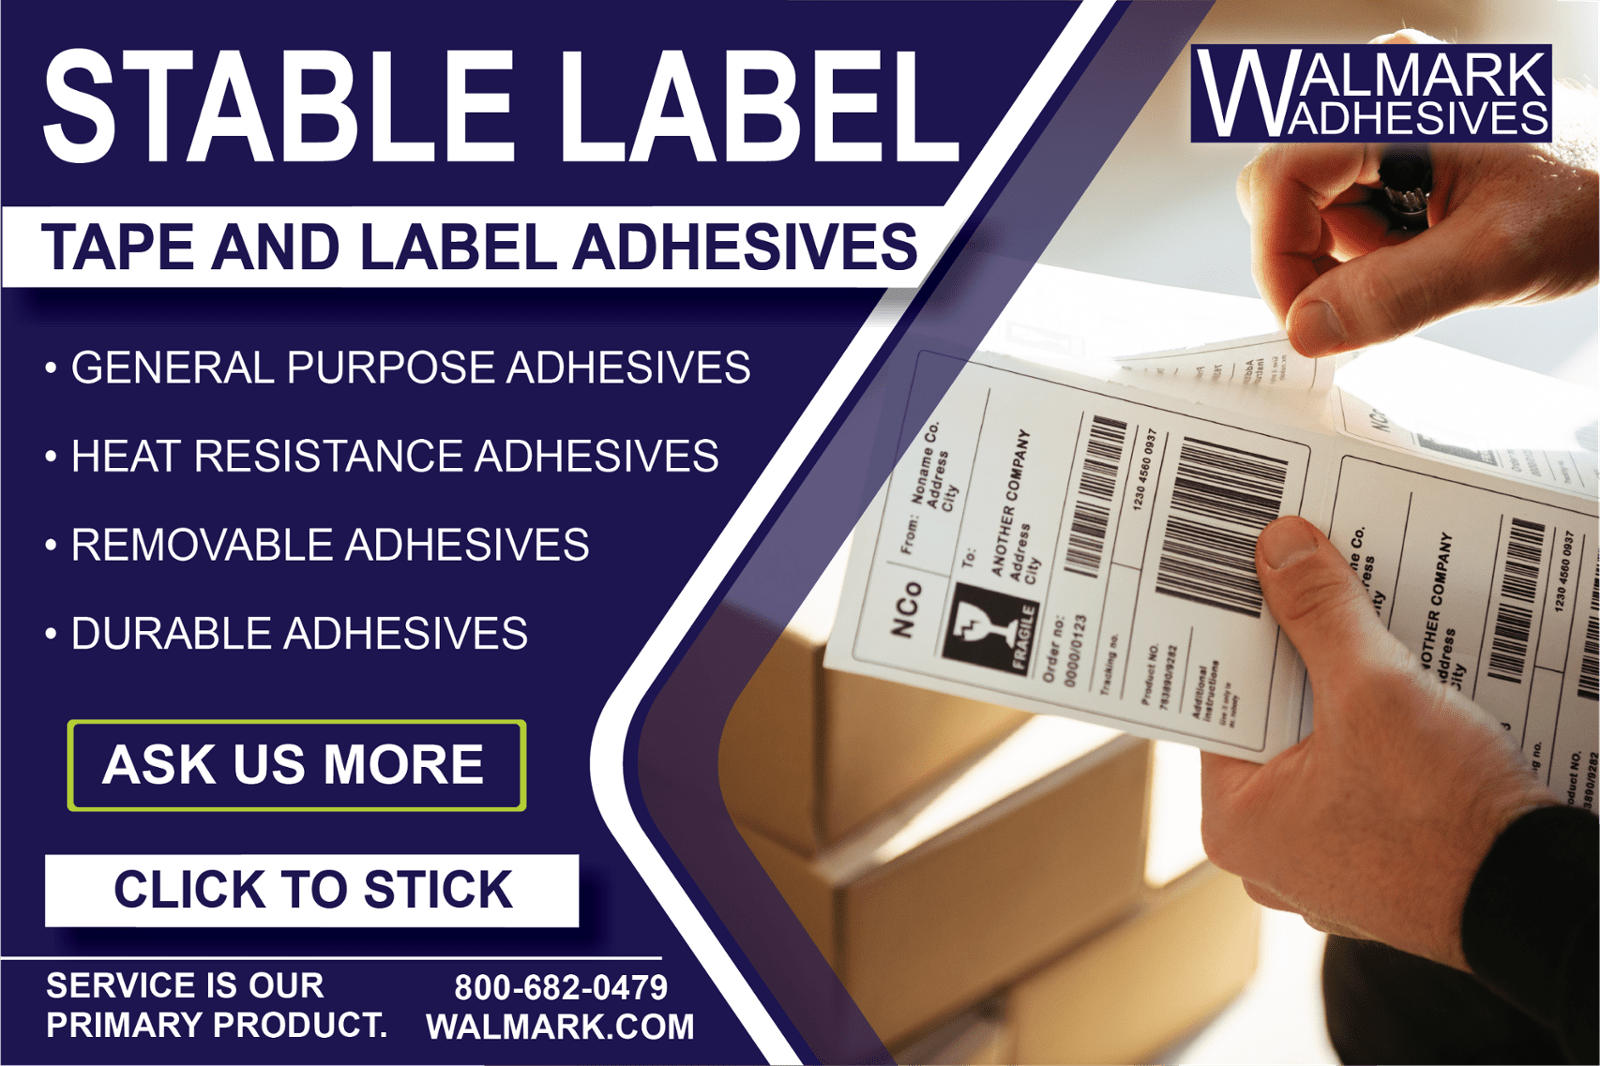 Walmark Tape and Label Adhesives